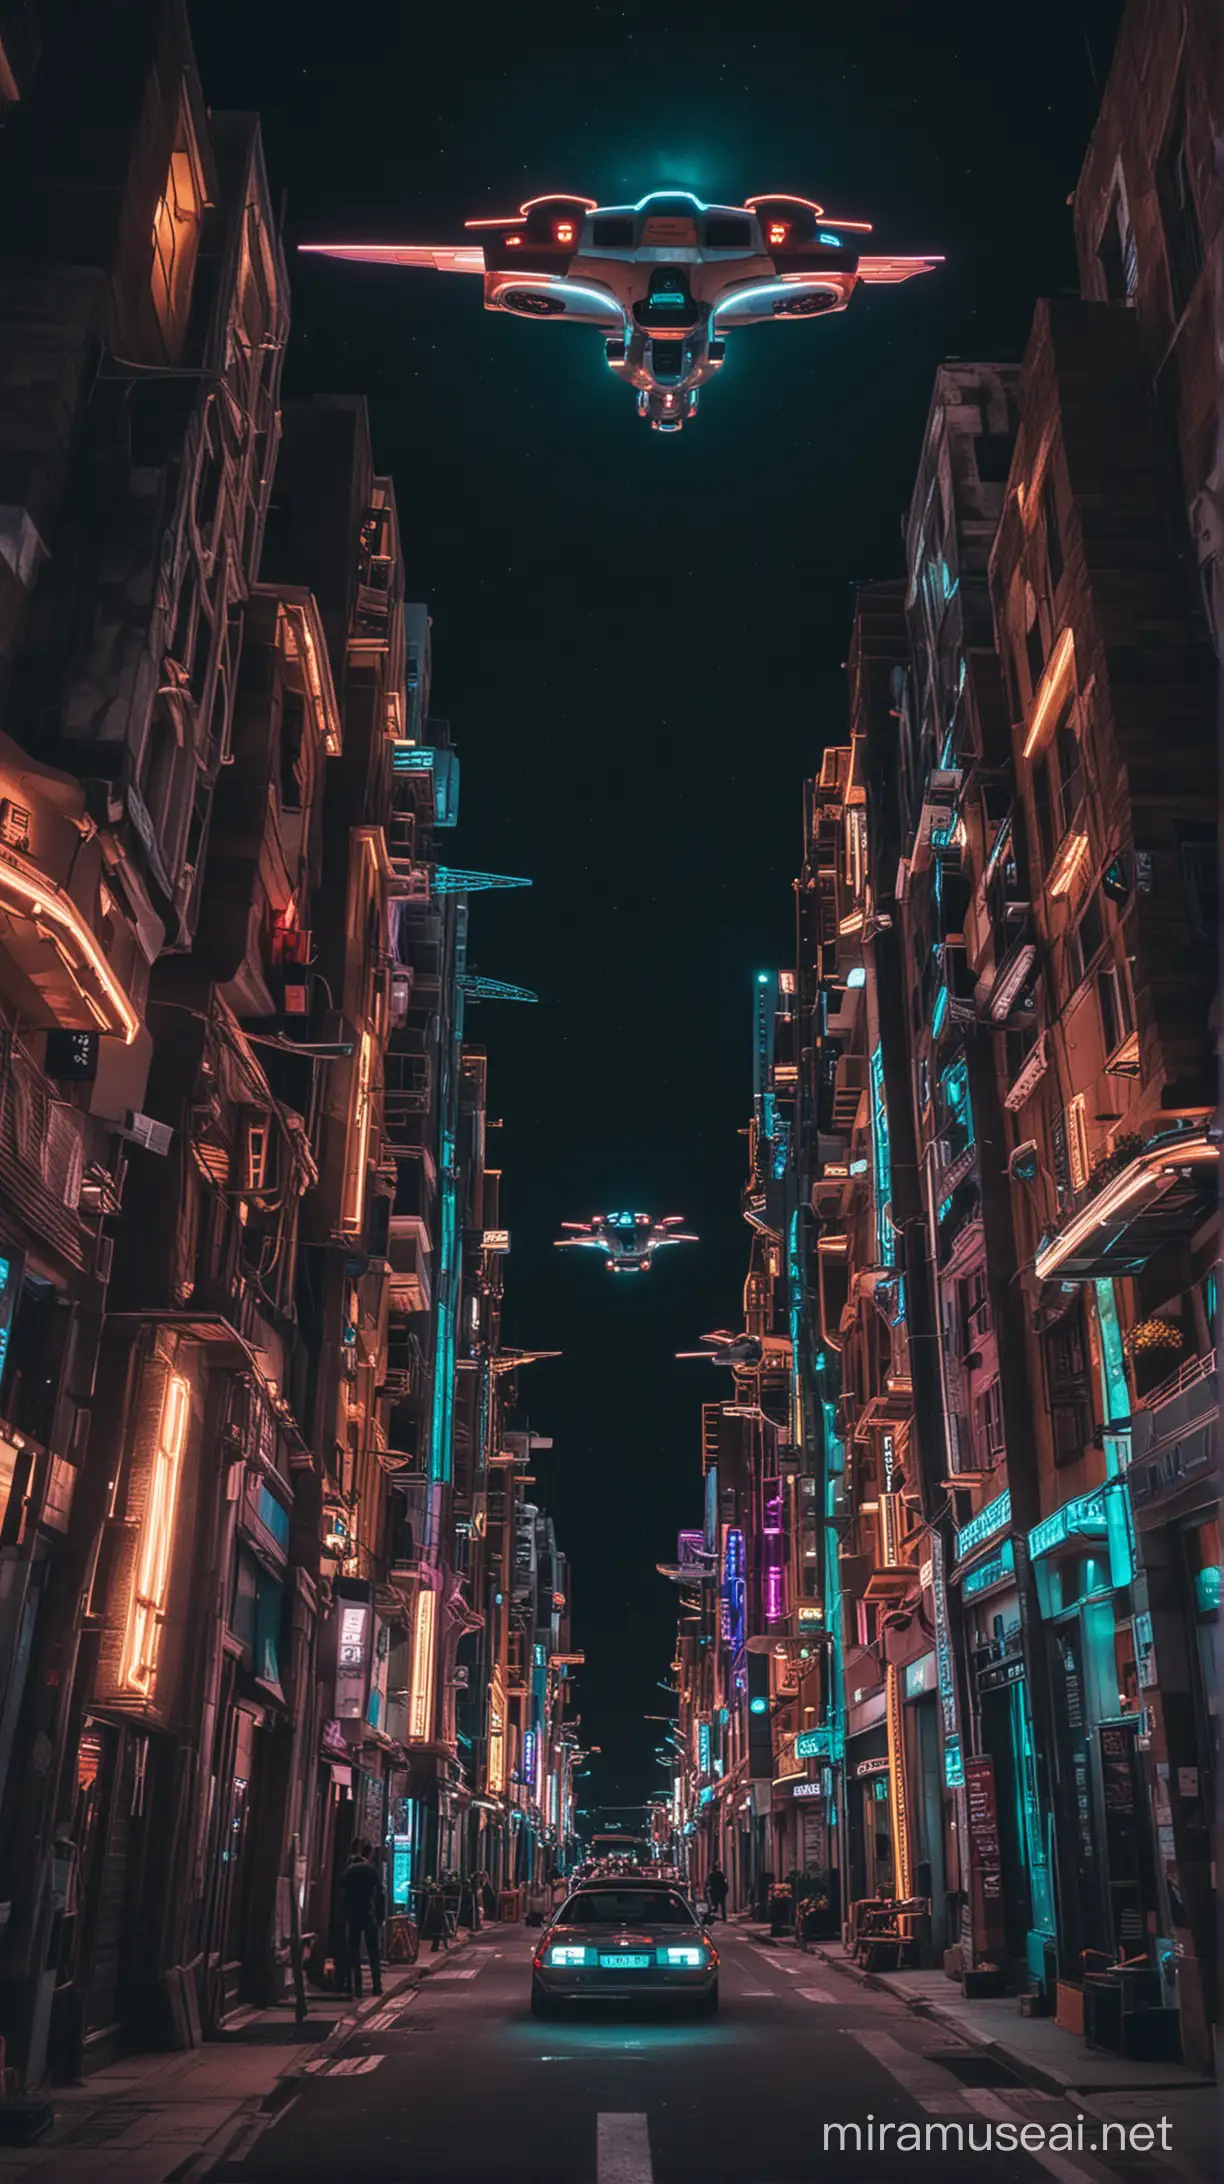 Ecumenopolis night with neon lighted buildings, flying cars. A person view from below